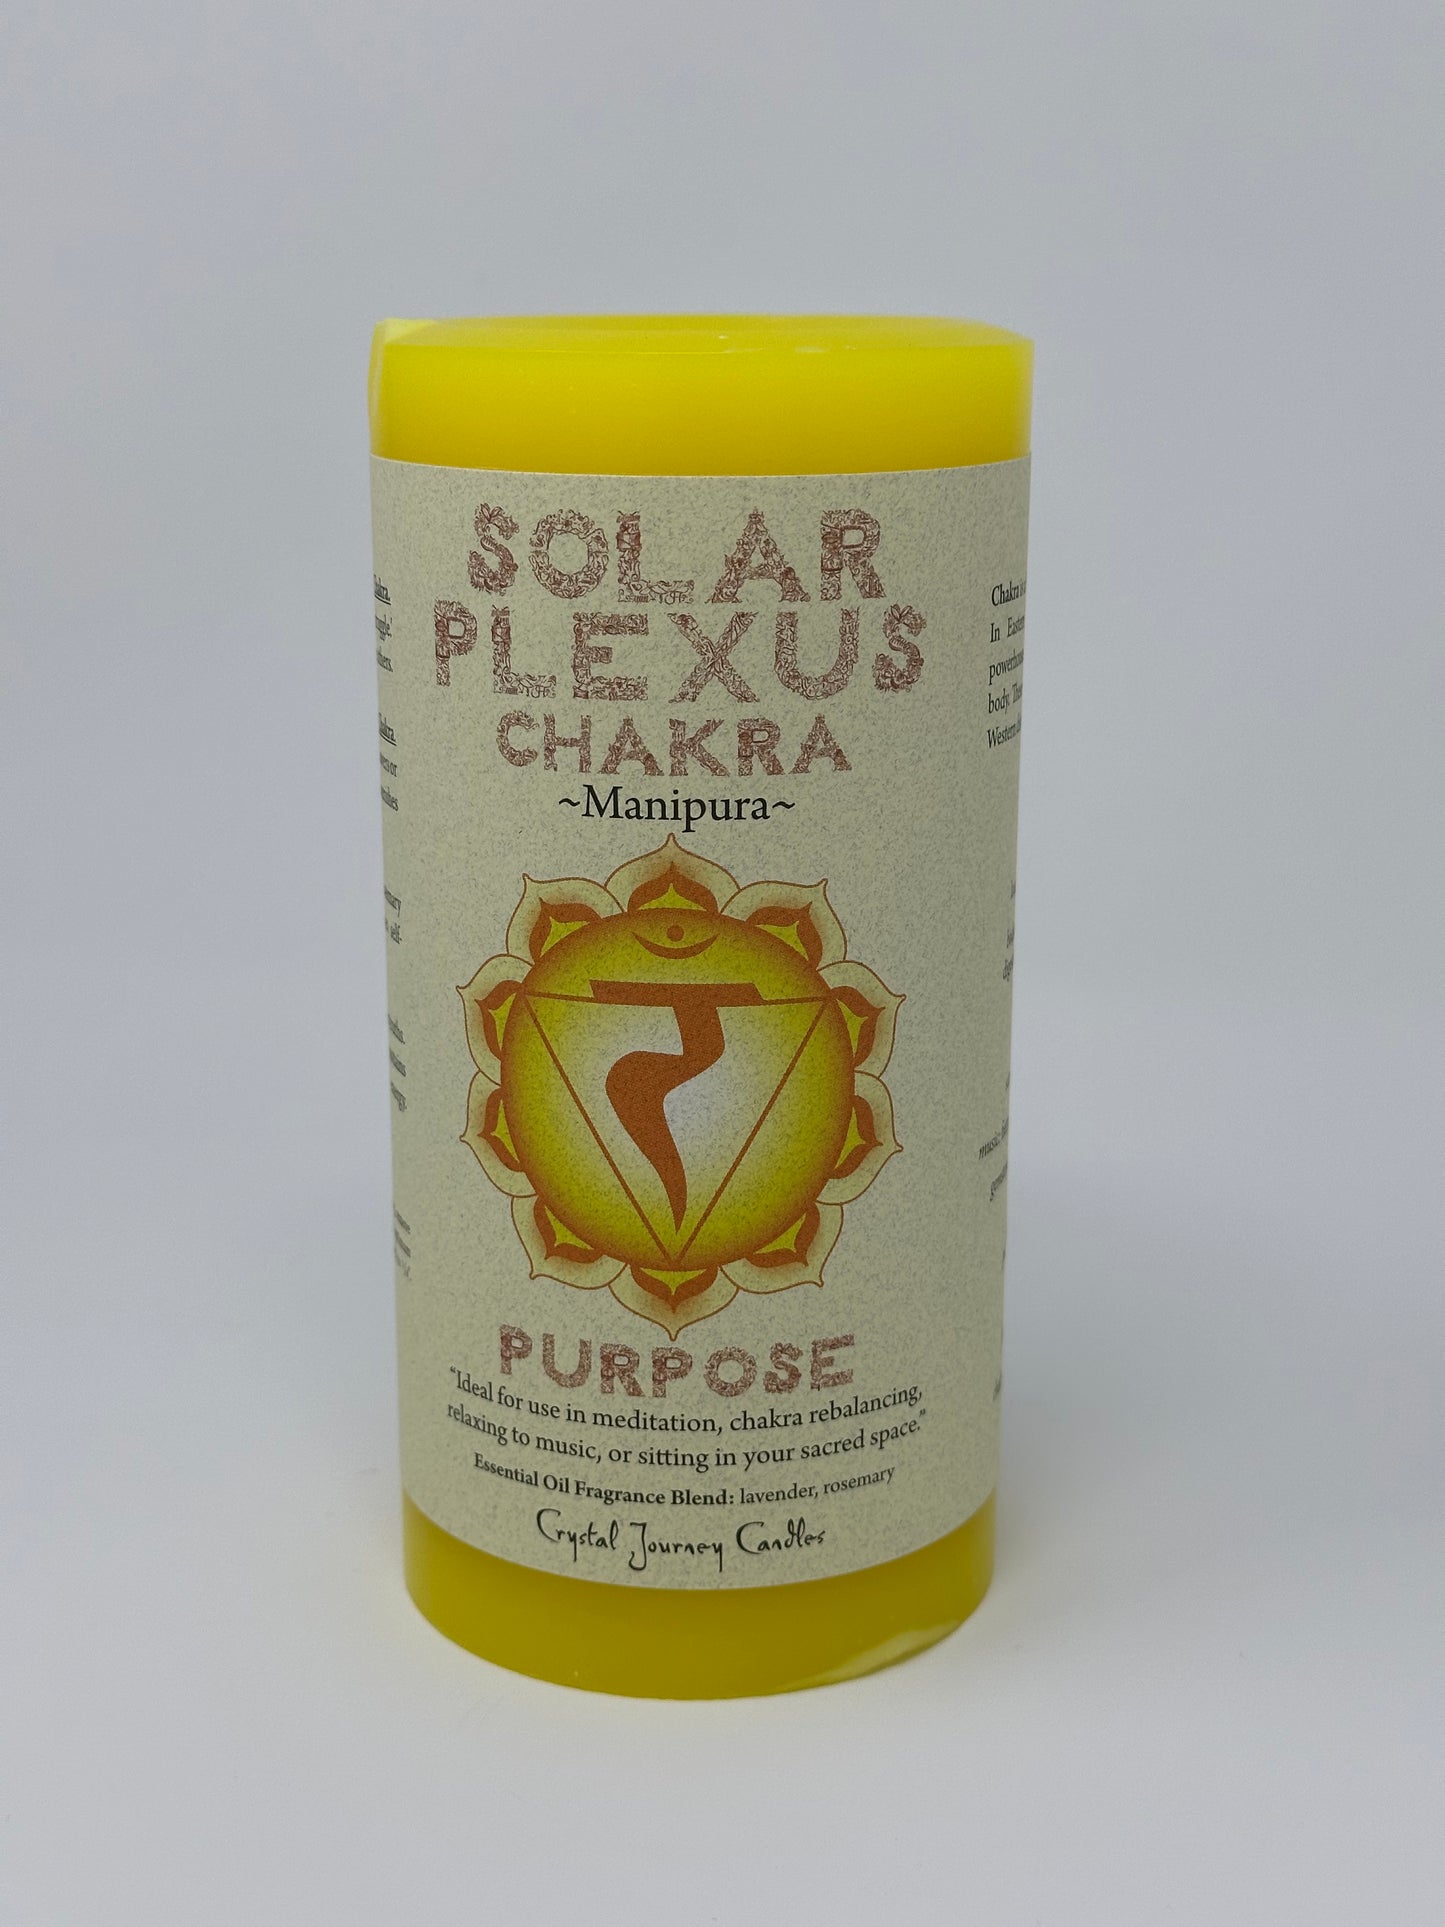 Chakra Pillars 3 x 6 by Crystal Journey Candles